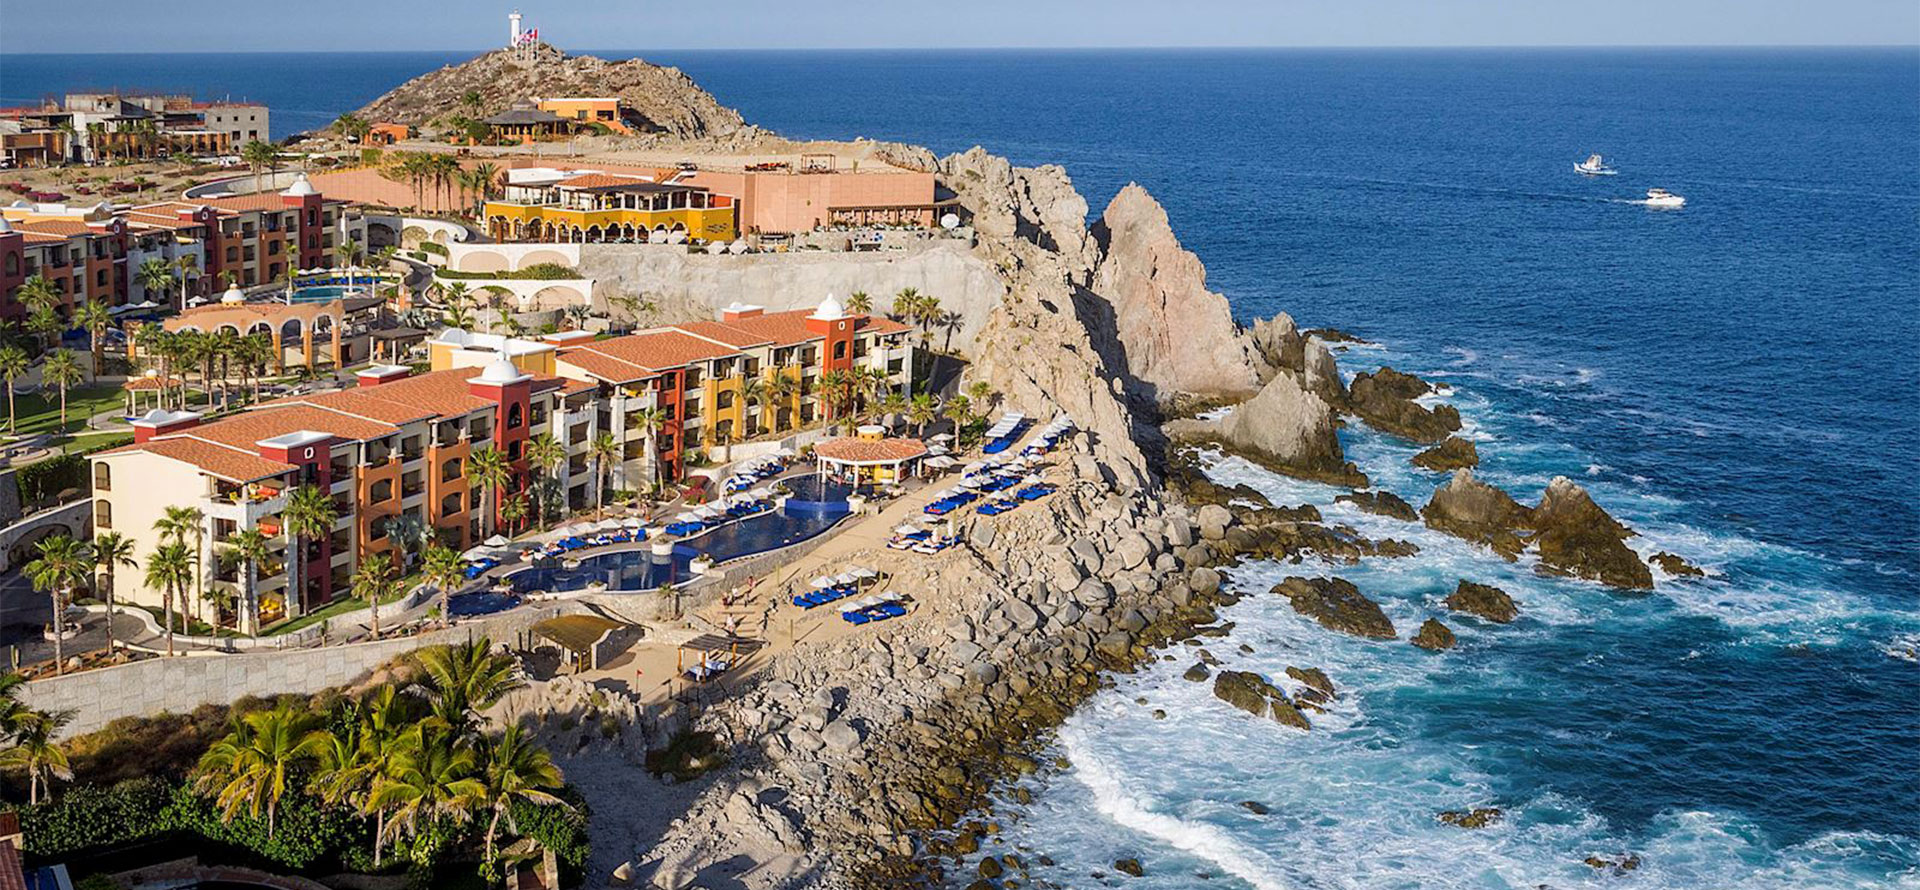 Cabo San Lucas resort for adults view from bird eye level.